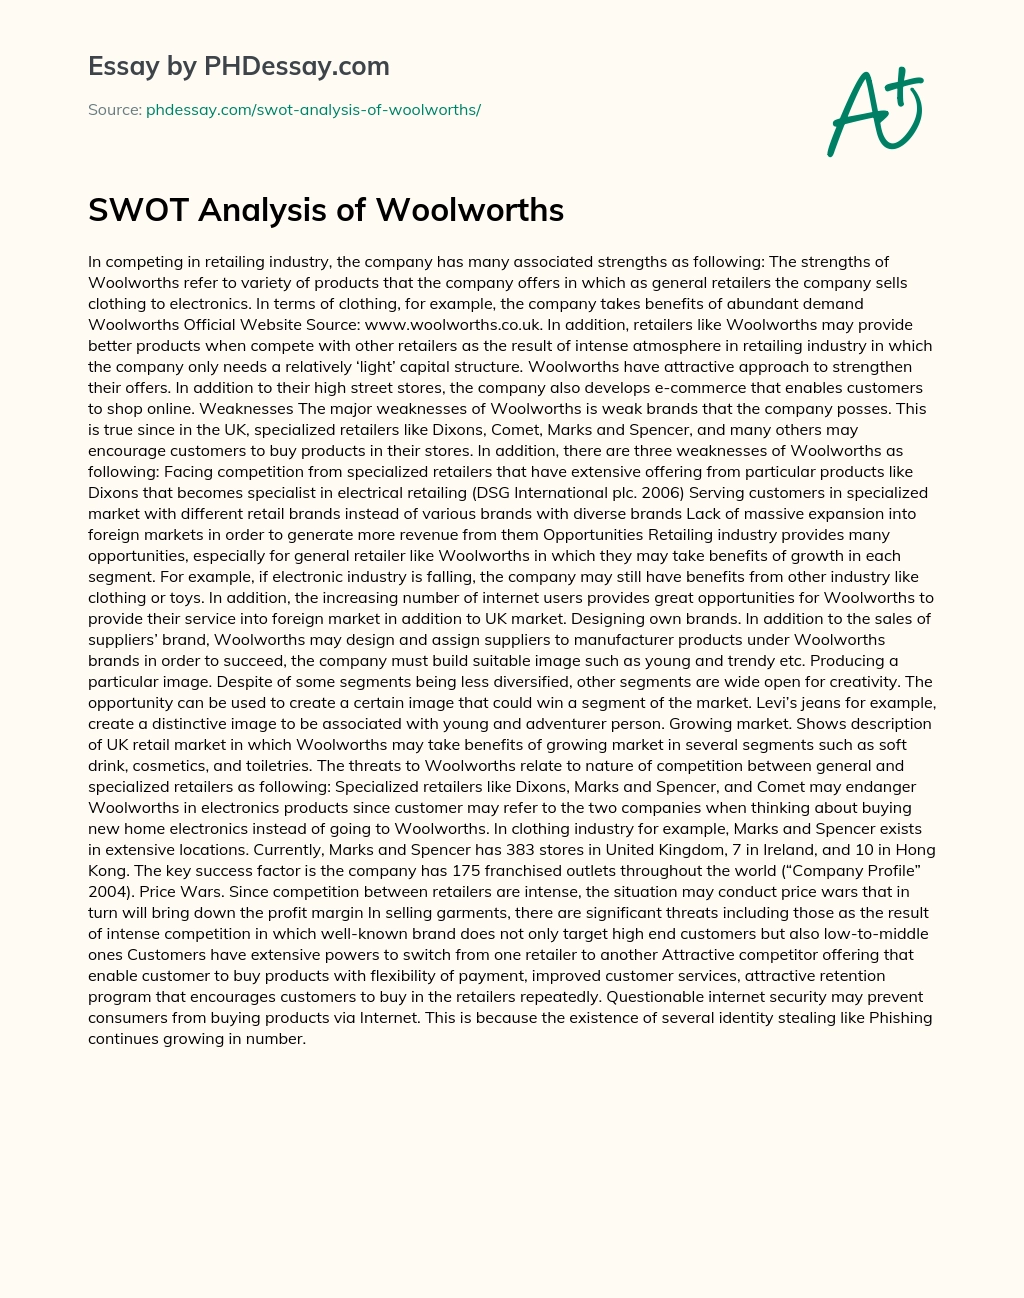 SWOT Analysis of Woolworths essay